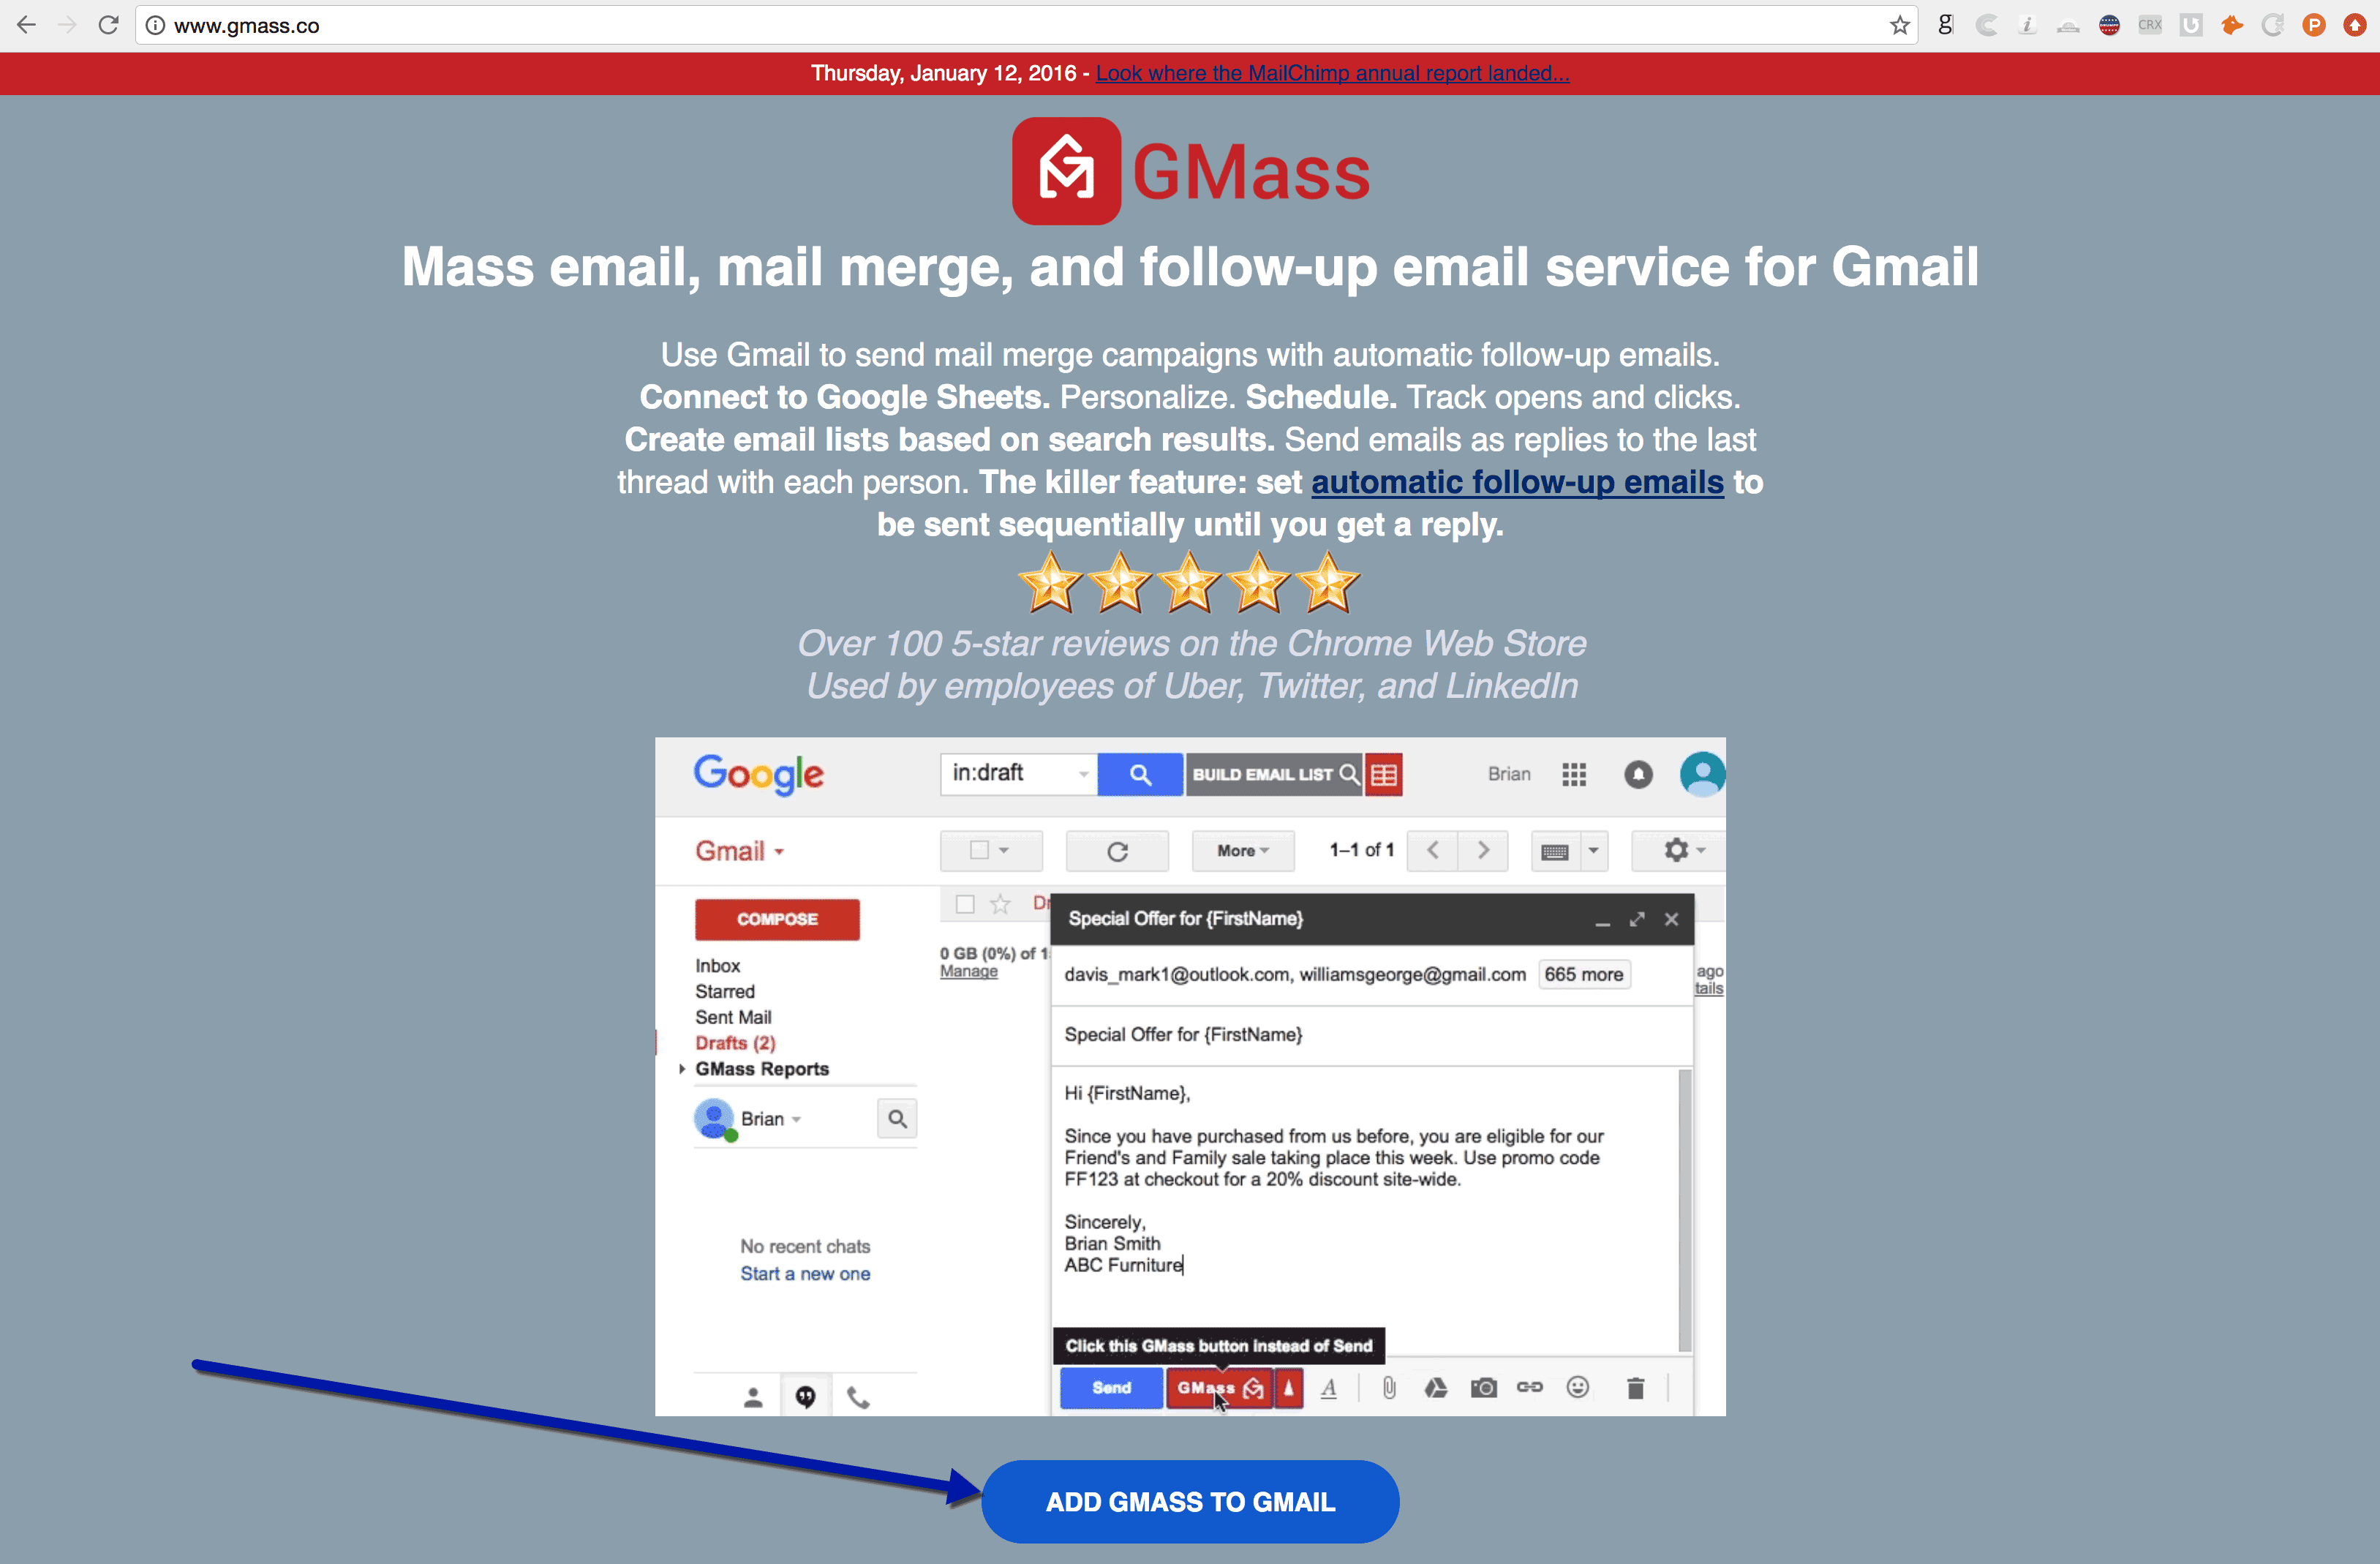 How To Install And Use Sortd Gmail Add-on On Chrome